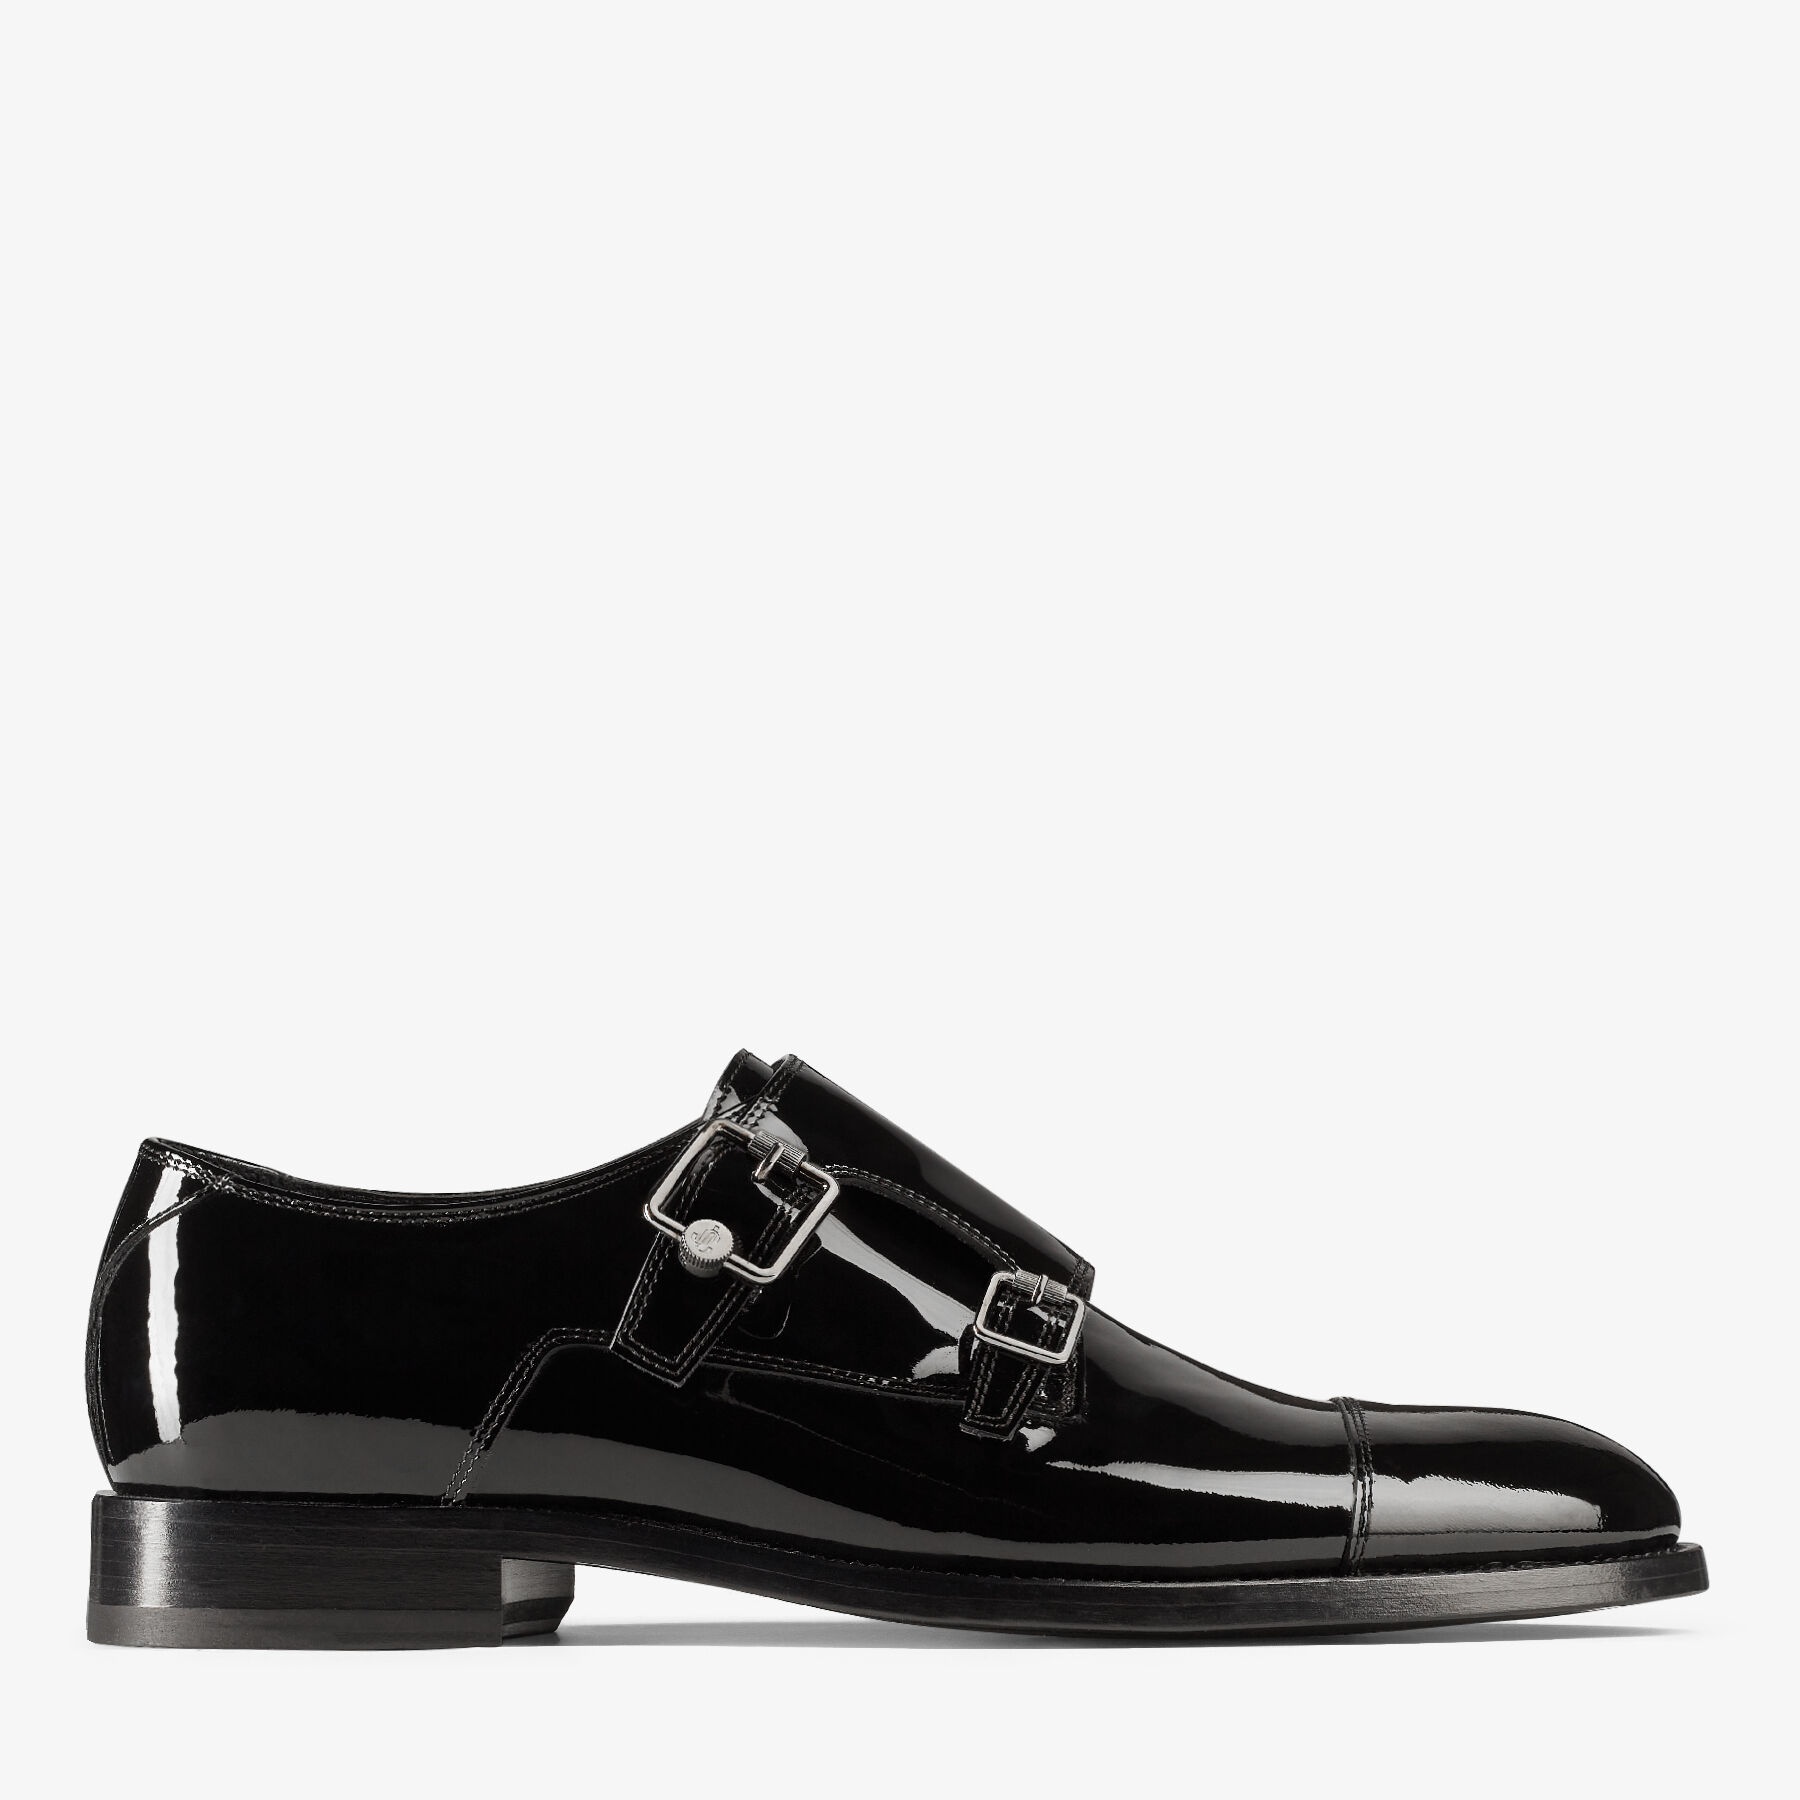 Finnion Monkstrap
Black Patent Leather Monk Strap Shoes with Studs - 1